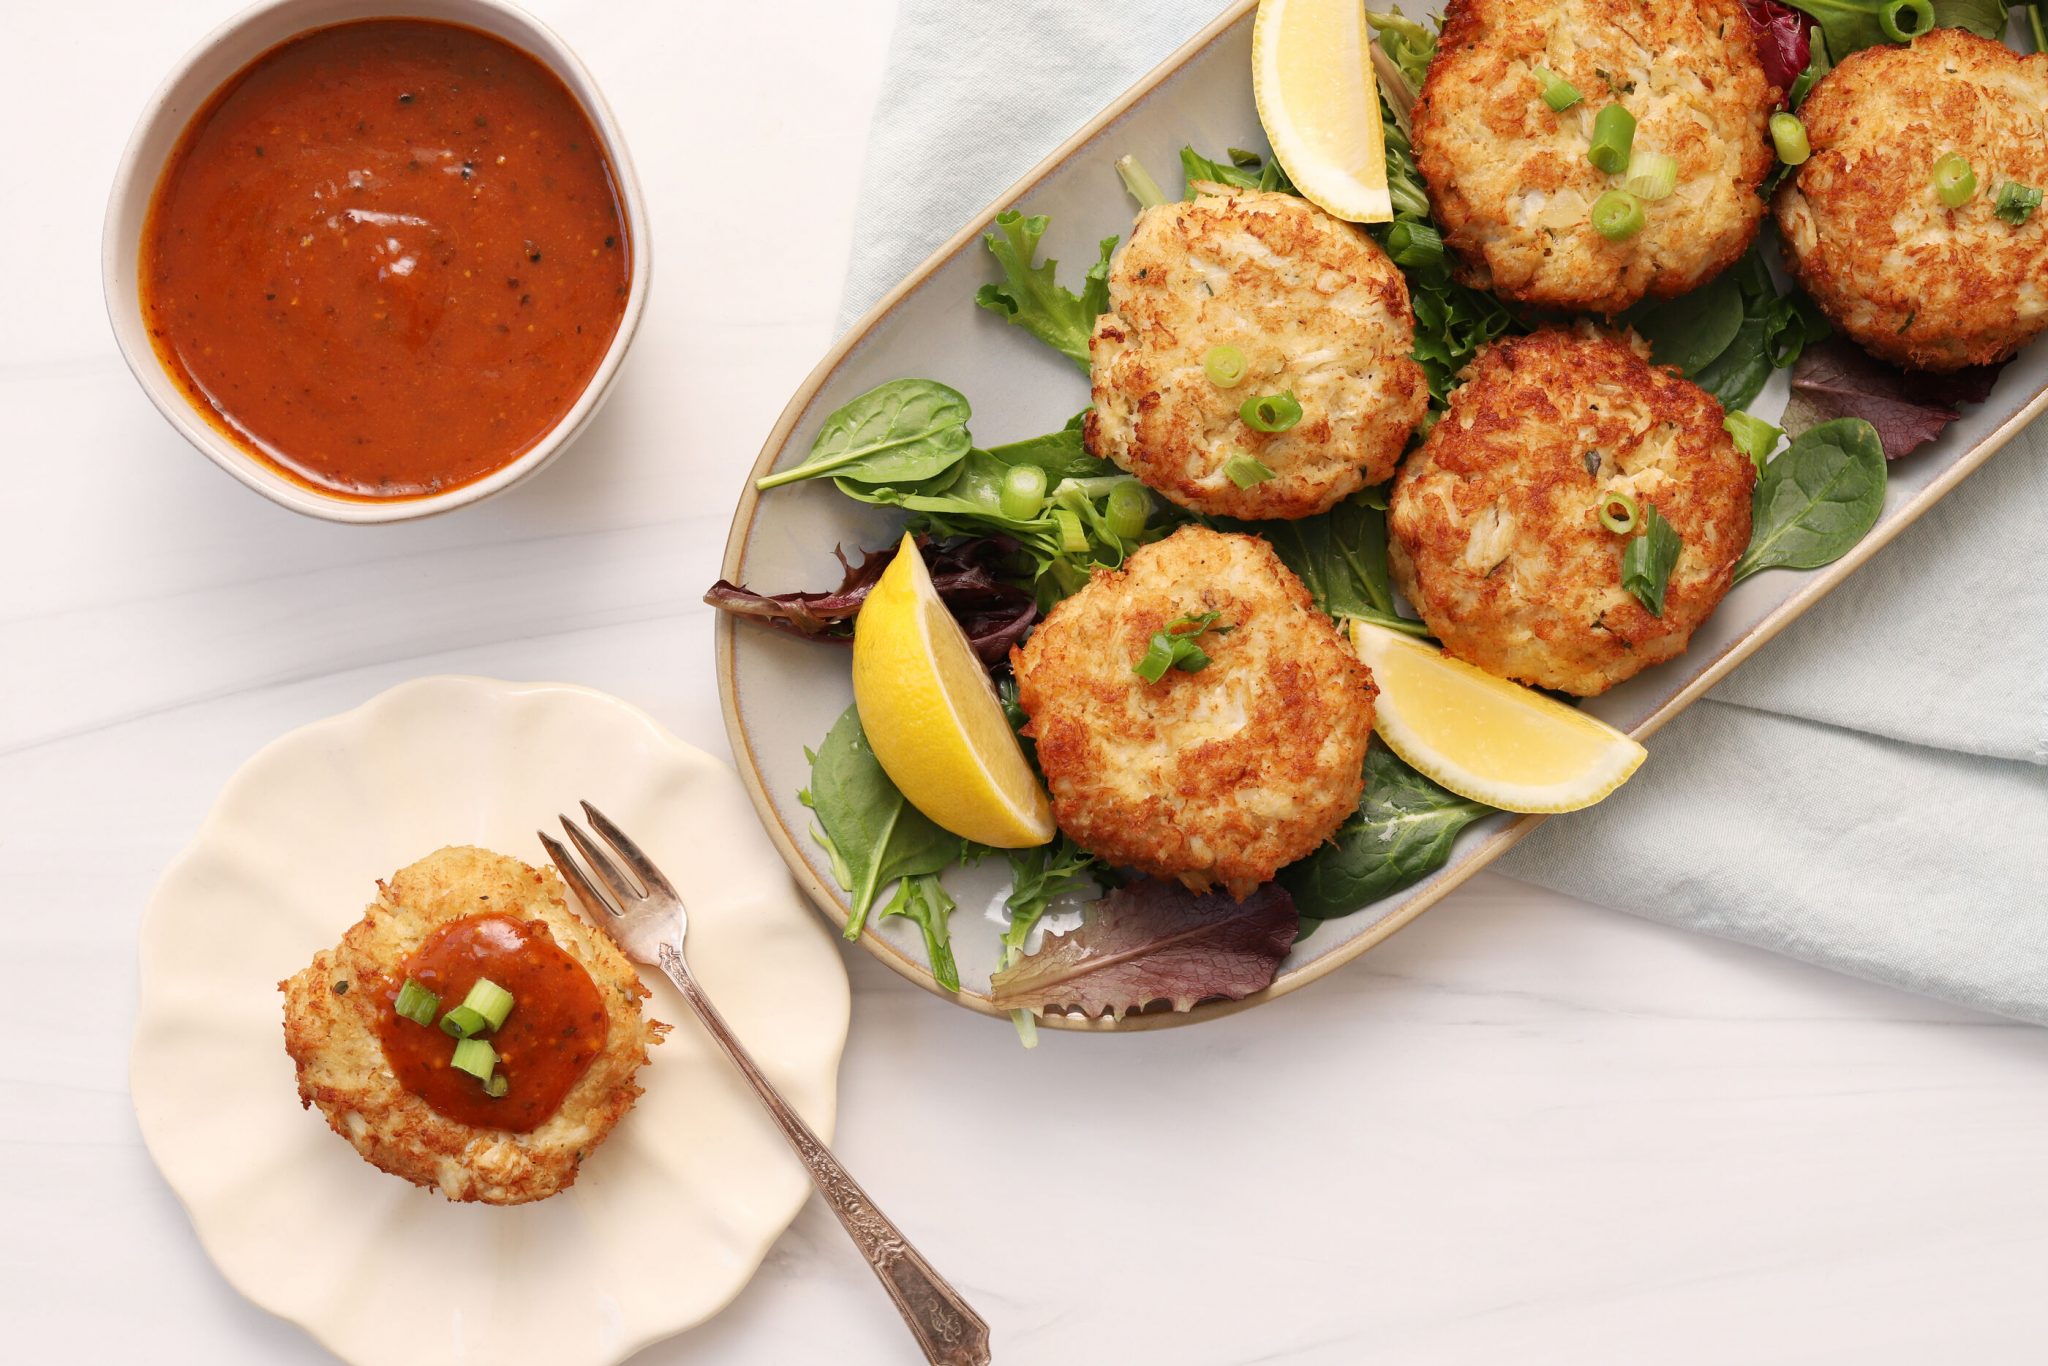 Speed Scratch Crab Cakes with Creole Mustard Sauce - Schlotterbeck & Foss